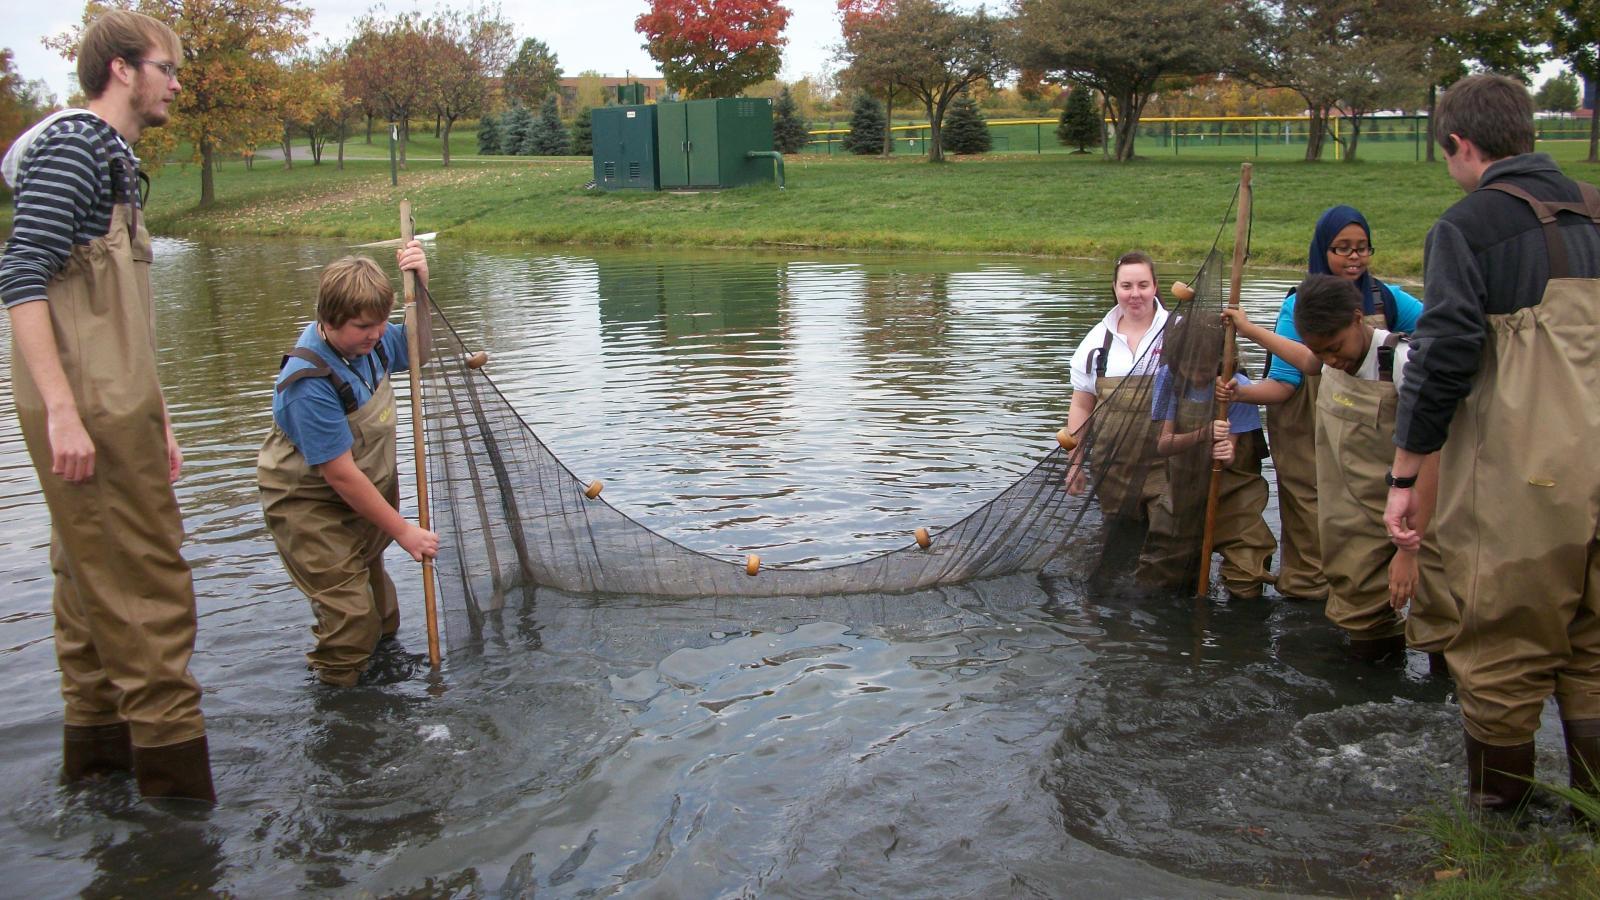 6th grade students using a seine in a pond